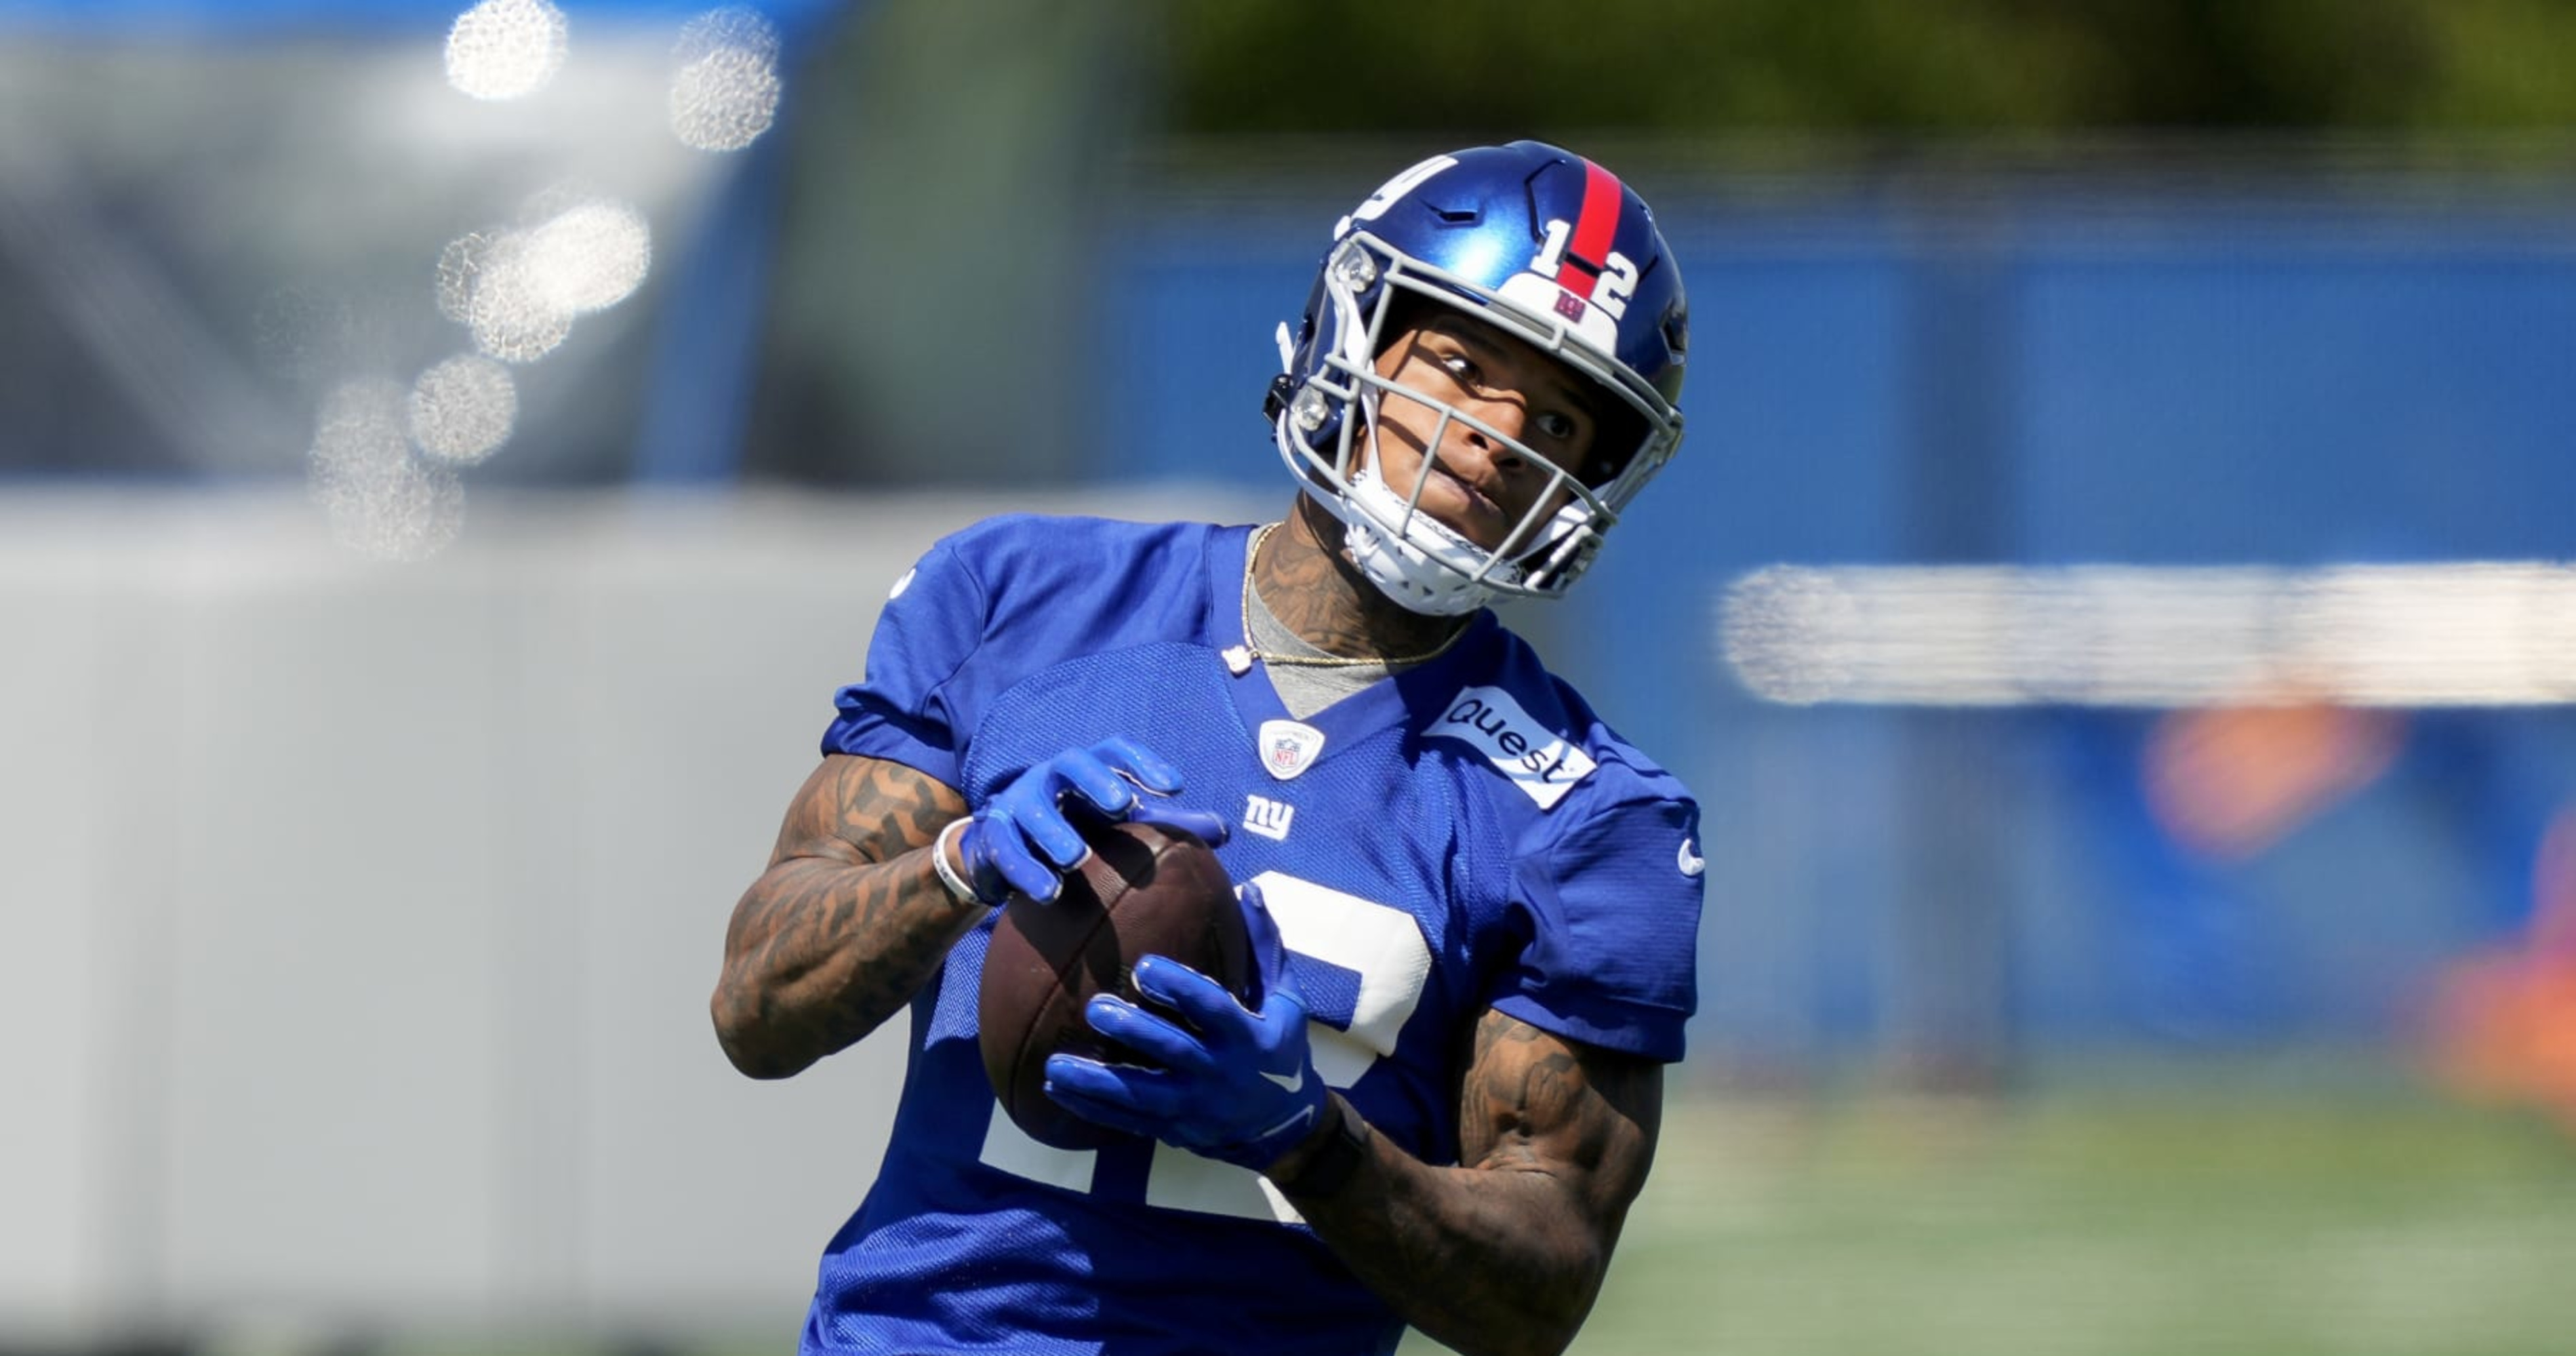 Giants rookie QB was quite the B-Ball player, he dunked on a 5 star recruit